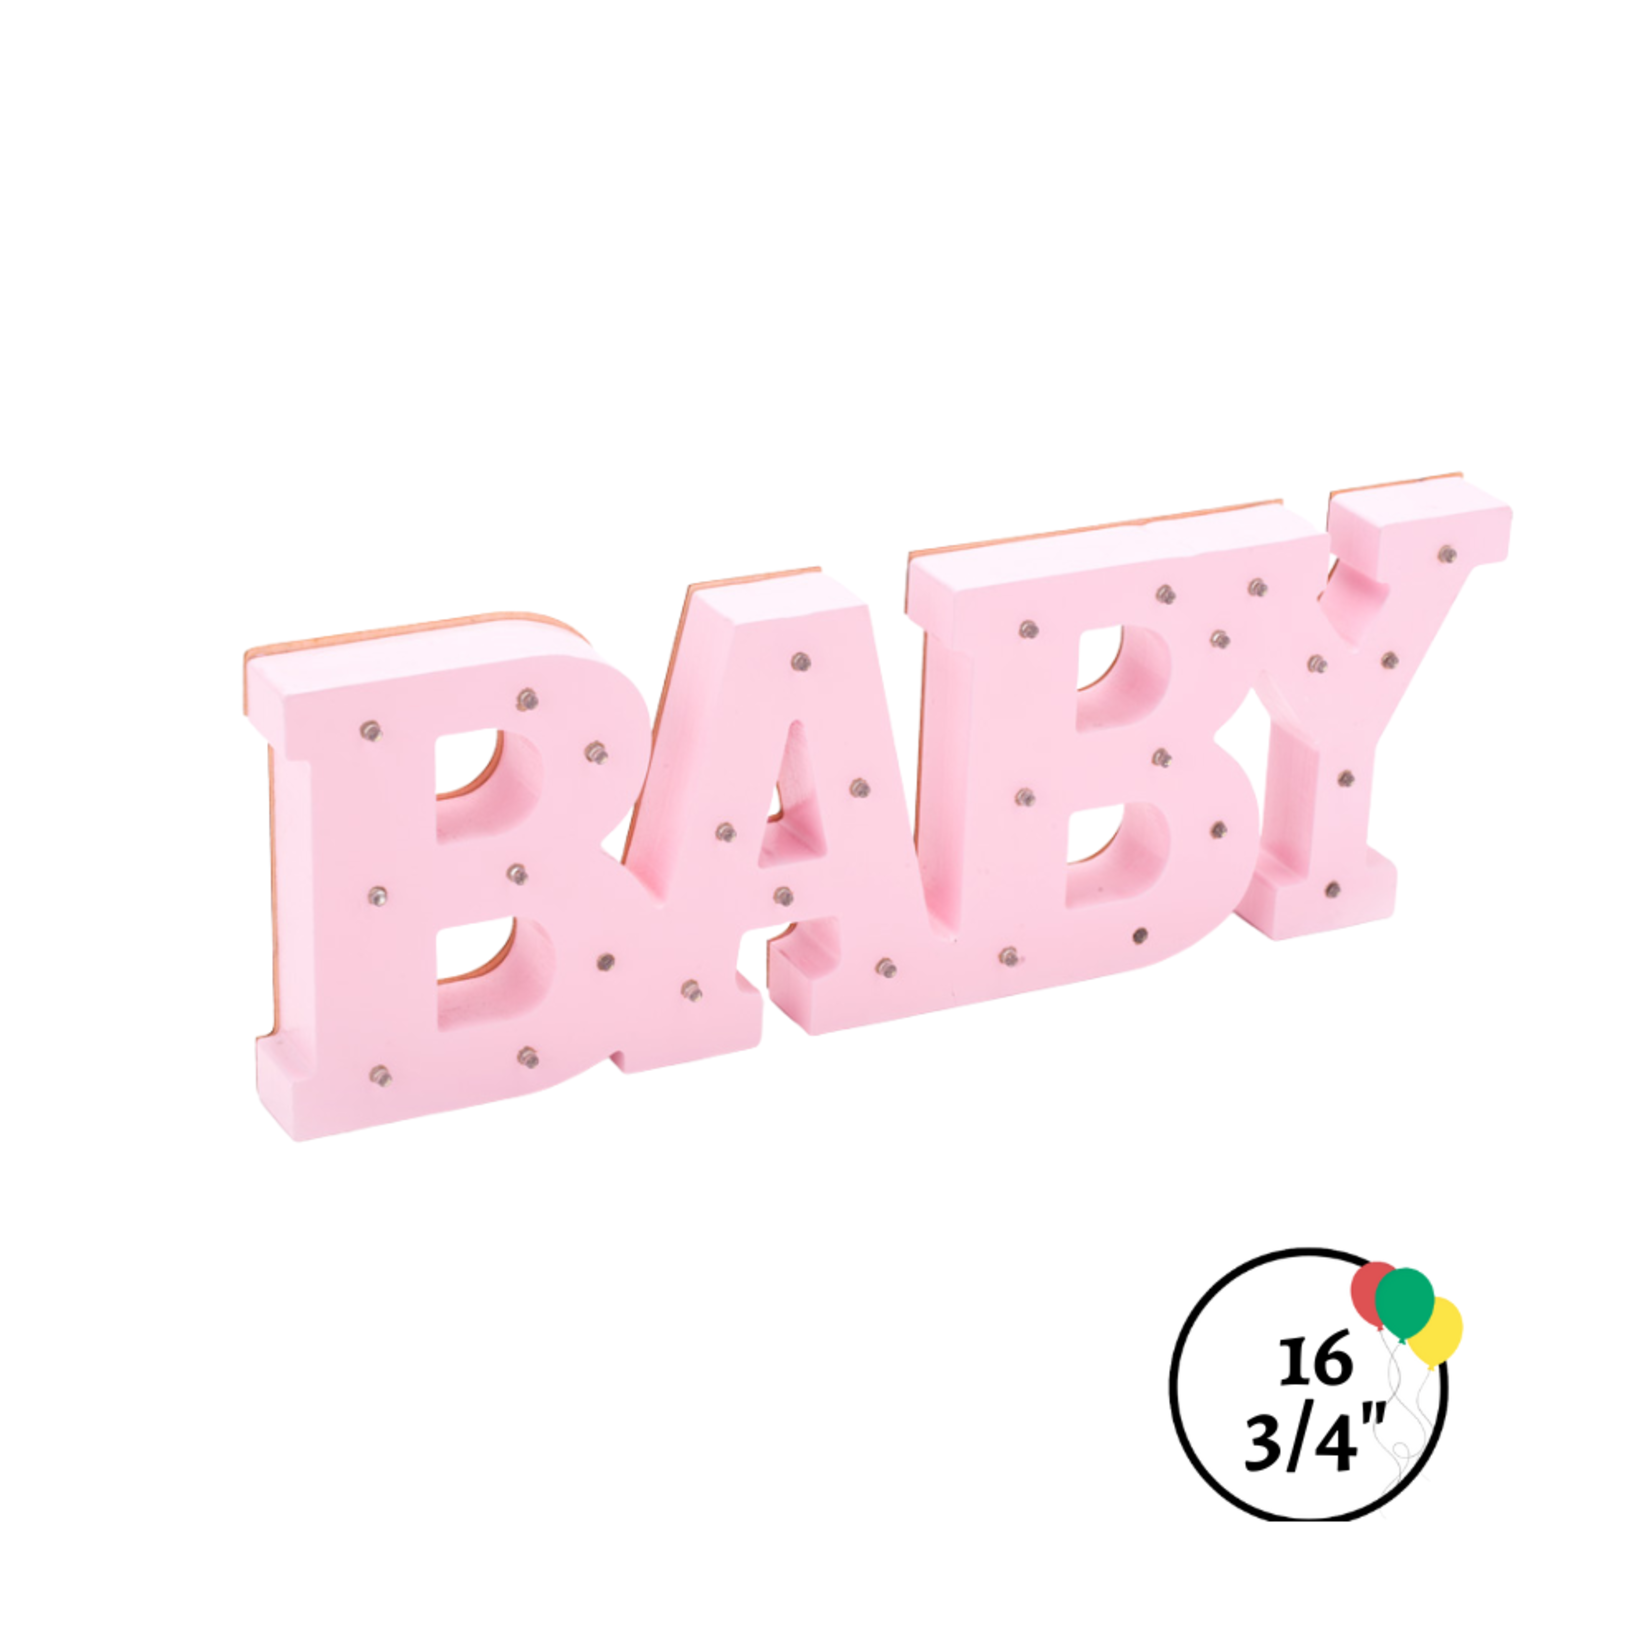 Wooden LED Marquee "Baby" -Pink 16 3/4 x 1 1/4 x 5 3/4"